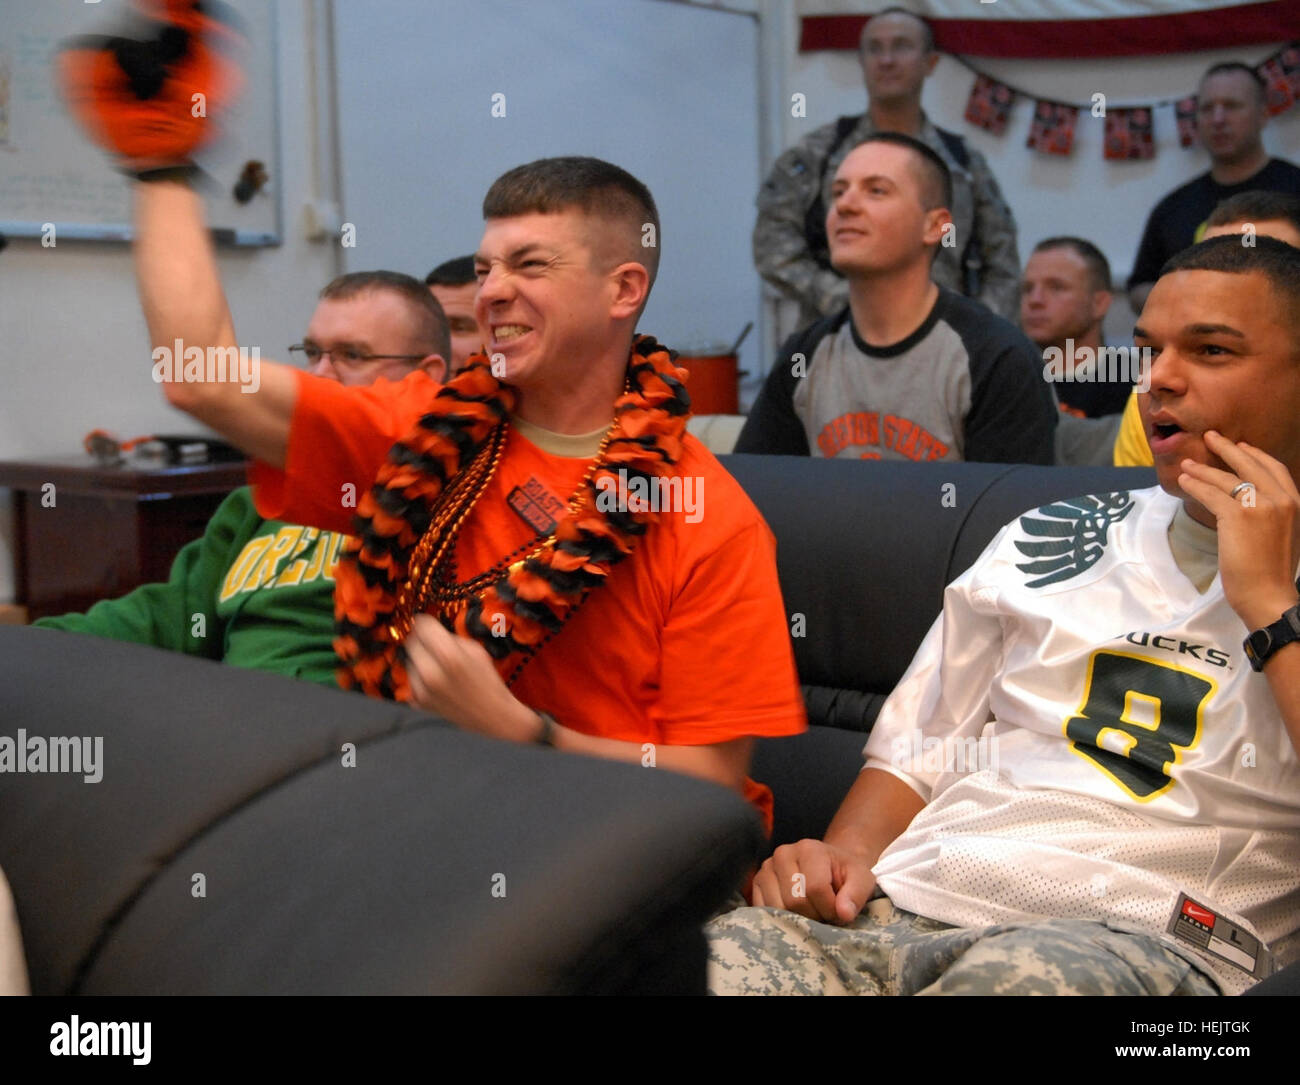 Sgt. Phillip Smith of Salem, shows support and spirit for his team, the Oregon State Univeristy Beavers in Tallil, Iraq, Dec. 4. The Civil War, as it is known, was made avalilable to Soldiers via ESPN through American Forces Network.The get together was made possible by Soldiers. The game was shown at Victory Base Complex, central Iraq and at Tallil, southern Iraq. Oregon Civil War in Iraq 228782 Stock Photo